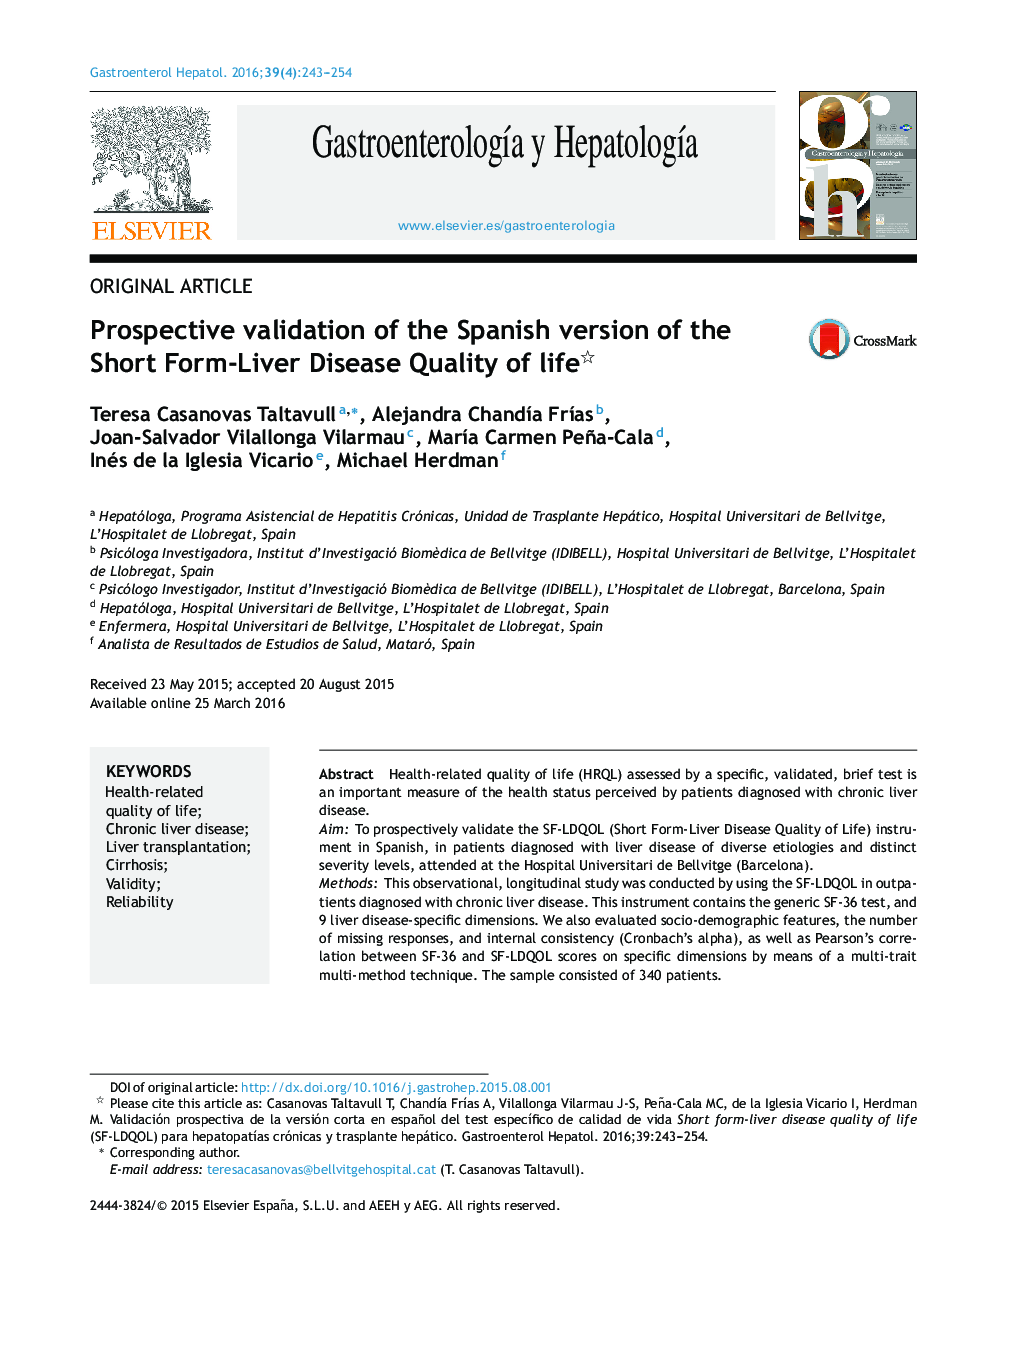 Prospective validation of the Spanish version of the Short Form-Liver Disease Quality of life 